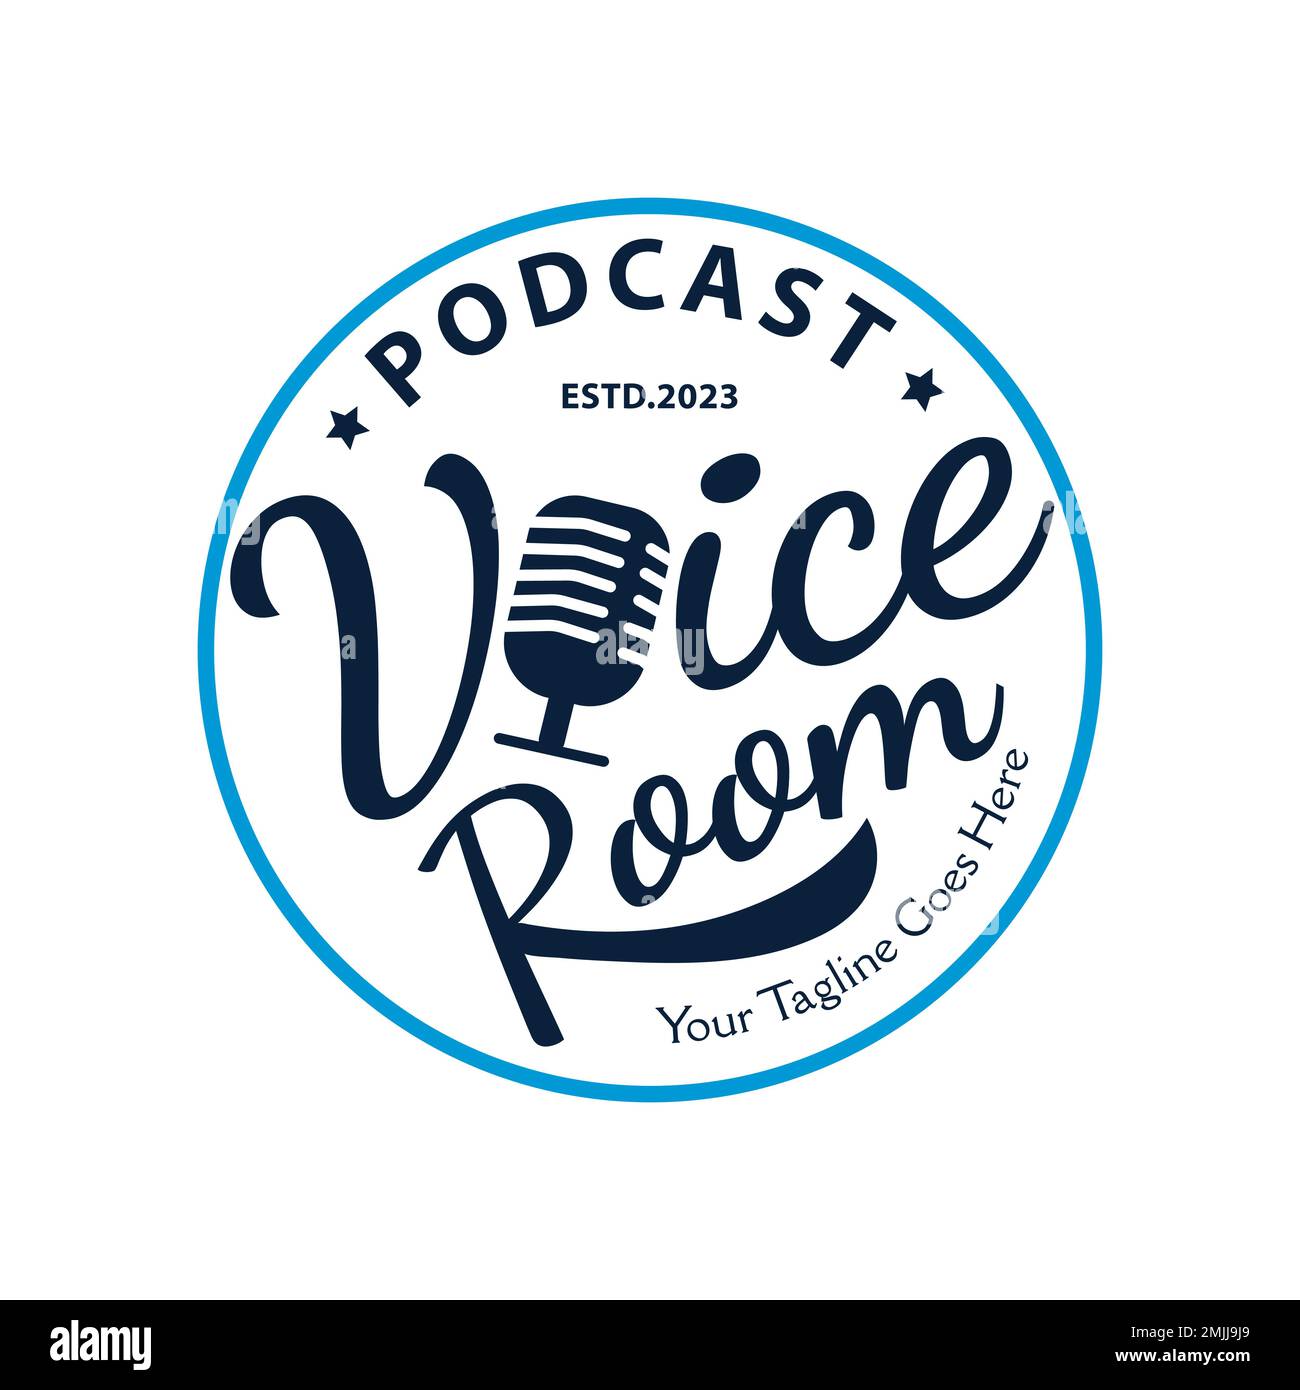 Podcast or Radio Logotype design using Microphone vector. stamp templates Stock Vector